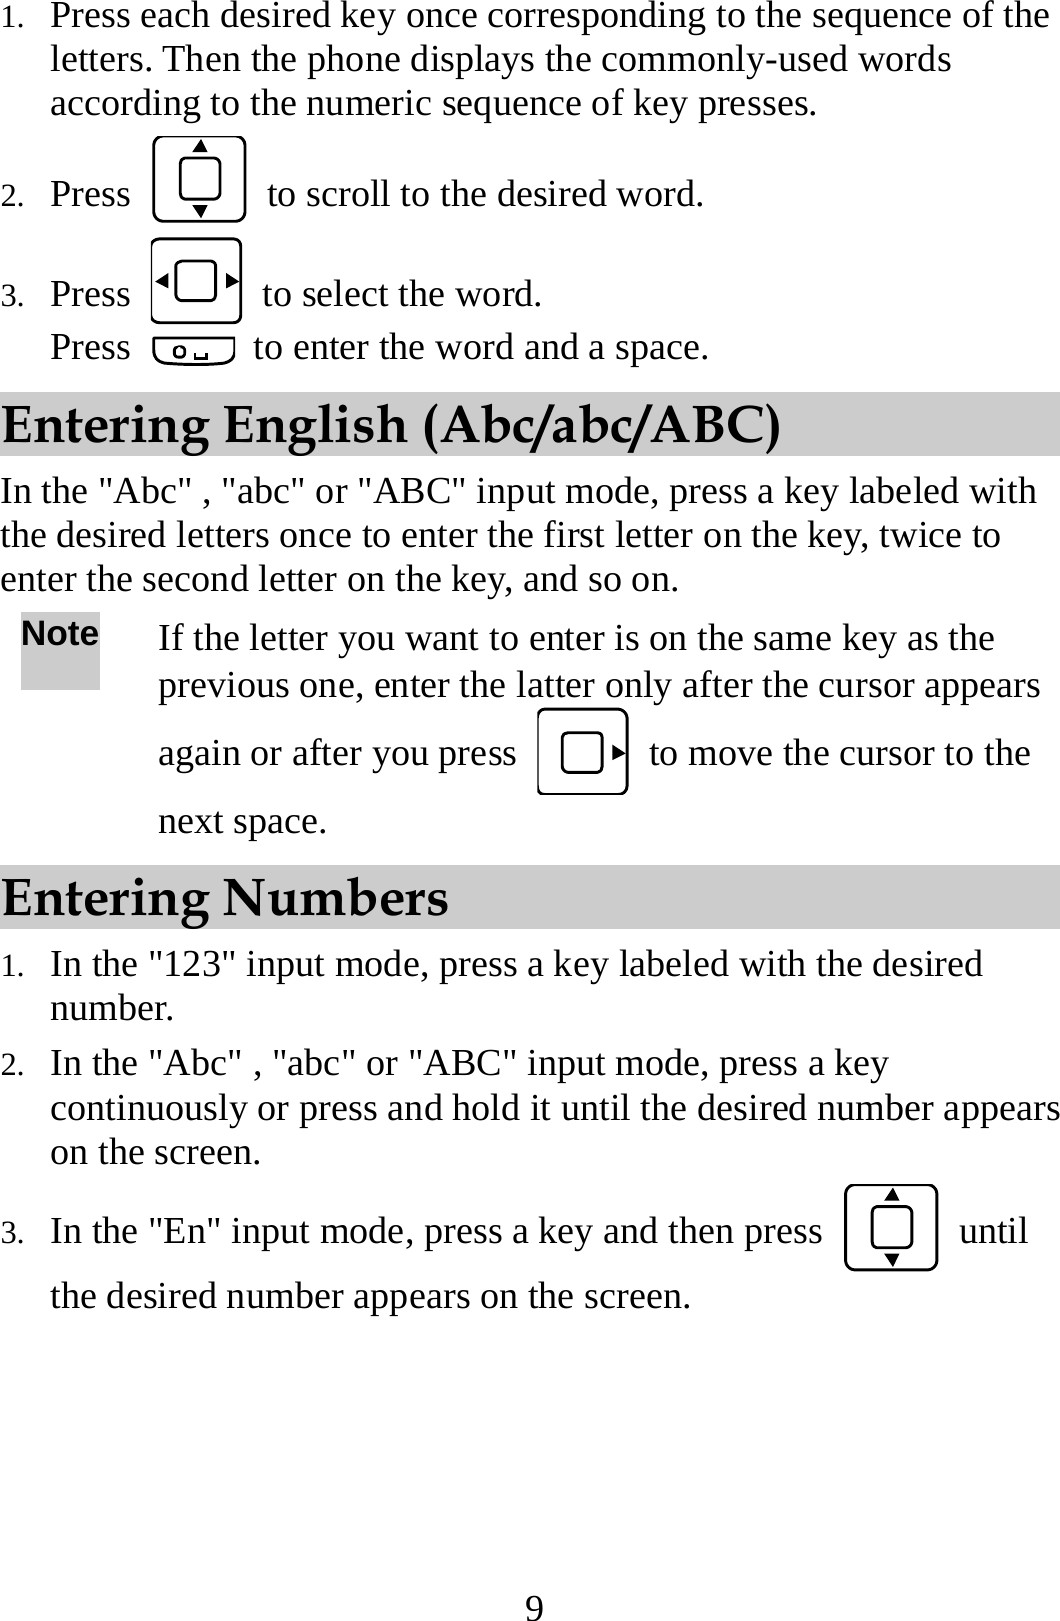 9 1. Press each desired key once corresponding to the sequence of the letters. Then the phone displays the commonly-used words according to the numeric sequence of key presses. 2. Press    to scroll to the desired word. 3. Press    to select the word. Press    to enter the word and a space. Entering English (Abc/abc/ABC) In the &quot;Abc&quot; , &quot;abc&quot; or &quot;ABC&quot; input mode, press a key labeled with the desired letters once to enter the first letter on the key, twice to enter the second letter on the key, and so on. Note If the letter you want to enter is on the same key as the previous one, enter the latter only after the cursor appears again or after you press    to move the cursor to the next space. Entering Numbers 1. In the &quot;123&quot; input mode, press a key labeled with the desired number. 2. In the &quot;Abc&quot; , &quot;abc&quot; or &quot;ABC&quot; input mode, press a key continuously or press and hold it until the desired number appears on the screen. 3. In the &quot;En&quot; input mode, press a key and then press   until the desired number appears on the screen. 